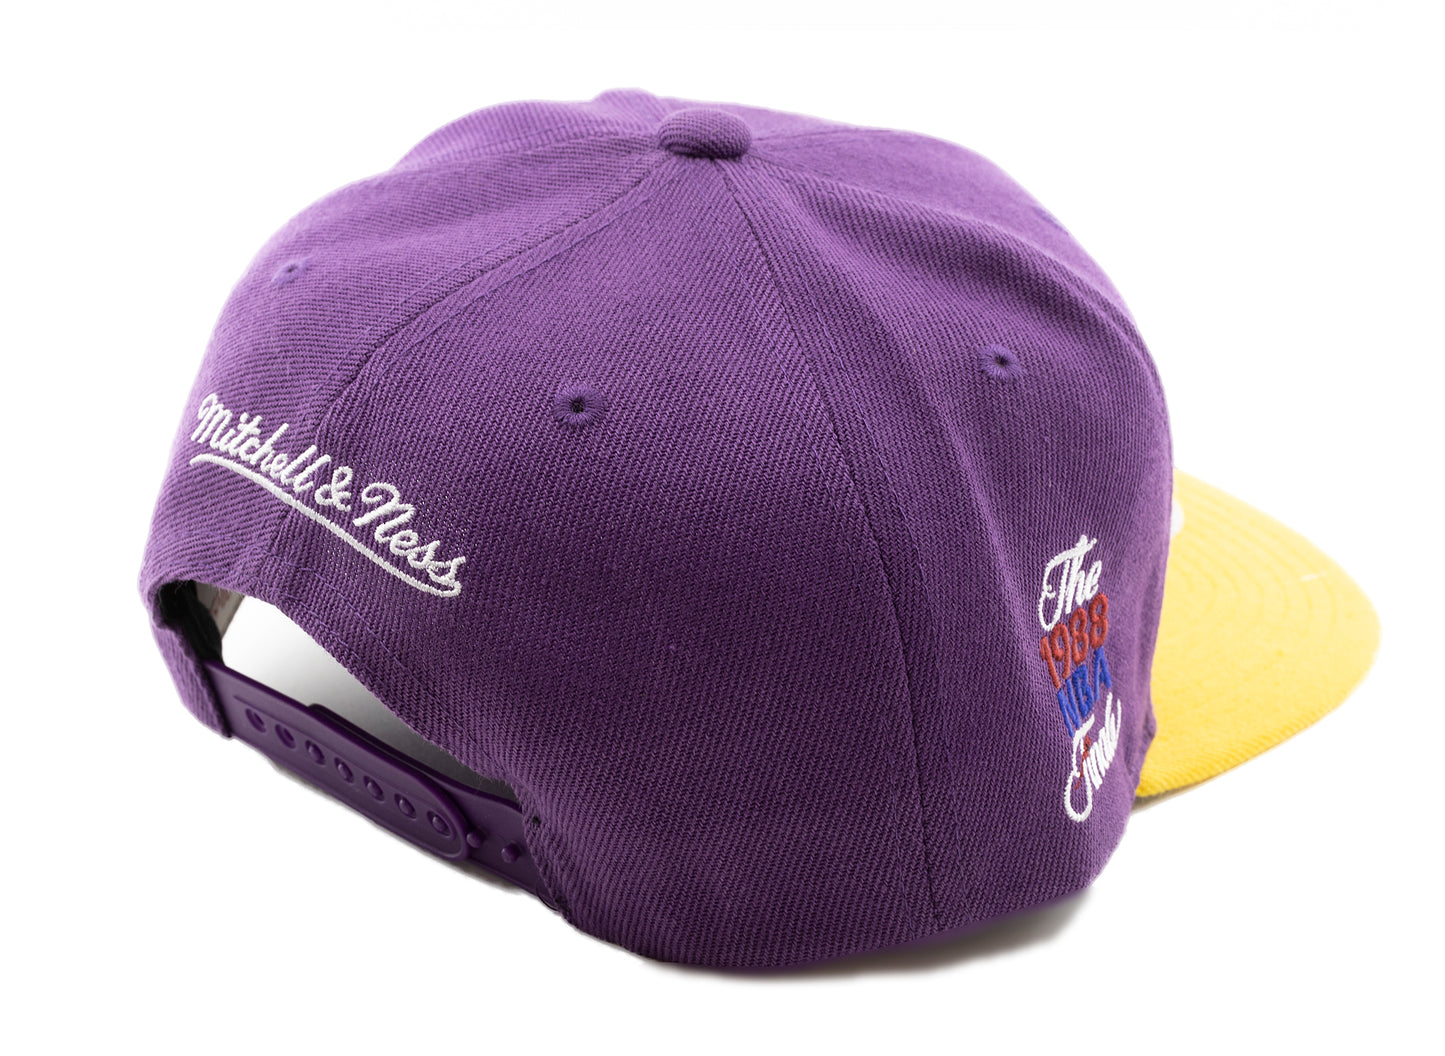 Mitchell & Ness NBA Finals Patch HWC Los Angeles Lakers Snapback